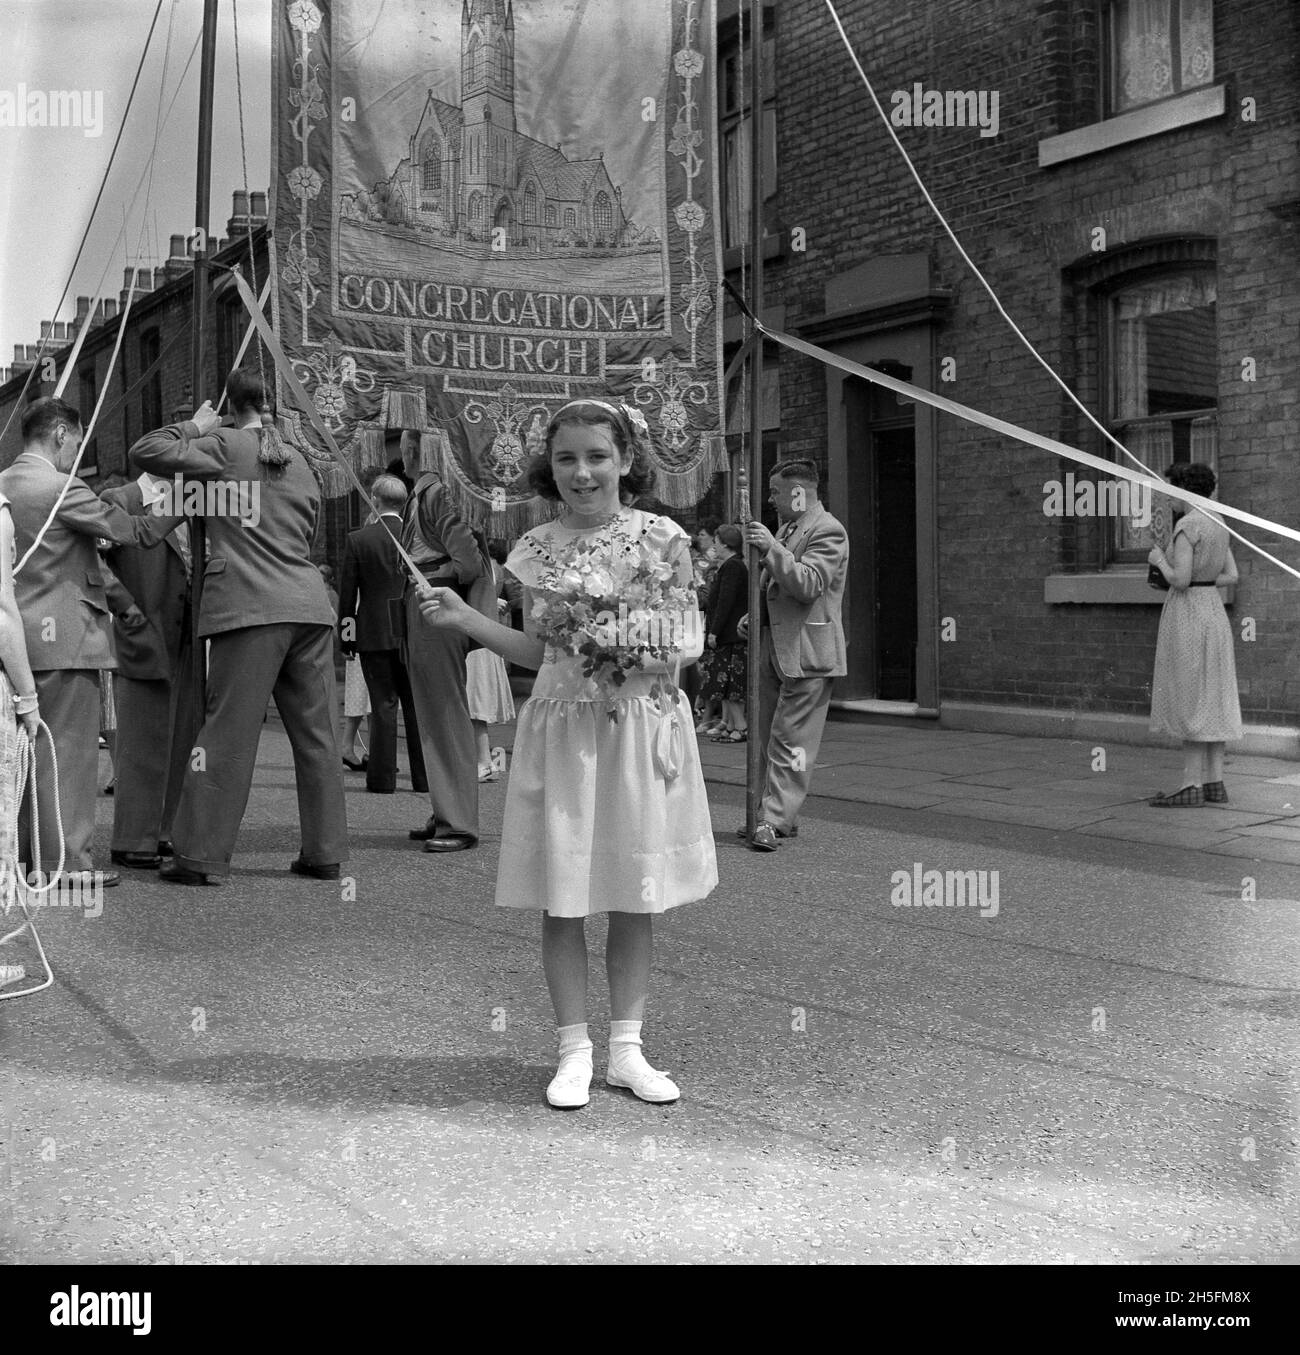 1950s, historical, outside in a street of victorian terraced houses, a young girl standing for her photo holding a rippon attached to a pole supporting a large hand-sown decorated blanket for the Congregational Church of Audley Range, Blackburn, Lancashire, England, UK. From the 1840s, the industrial revolution and the growth of the cotton and textile industries had transformed the area and terraced housing, schools, shops, pubs and churches were built on farm land to service the new population working in the factories and textile mills. Stock Photo